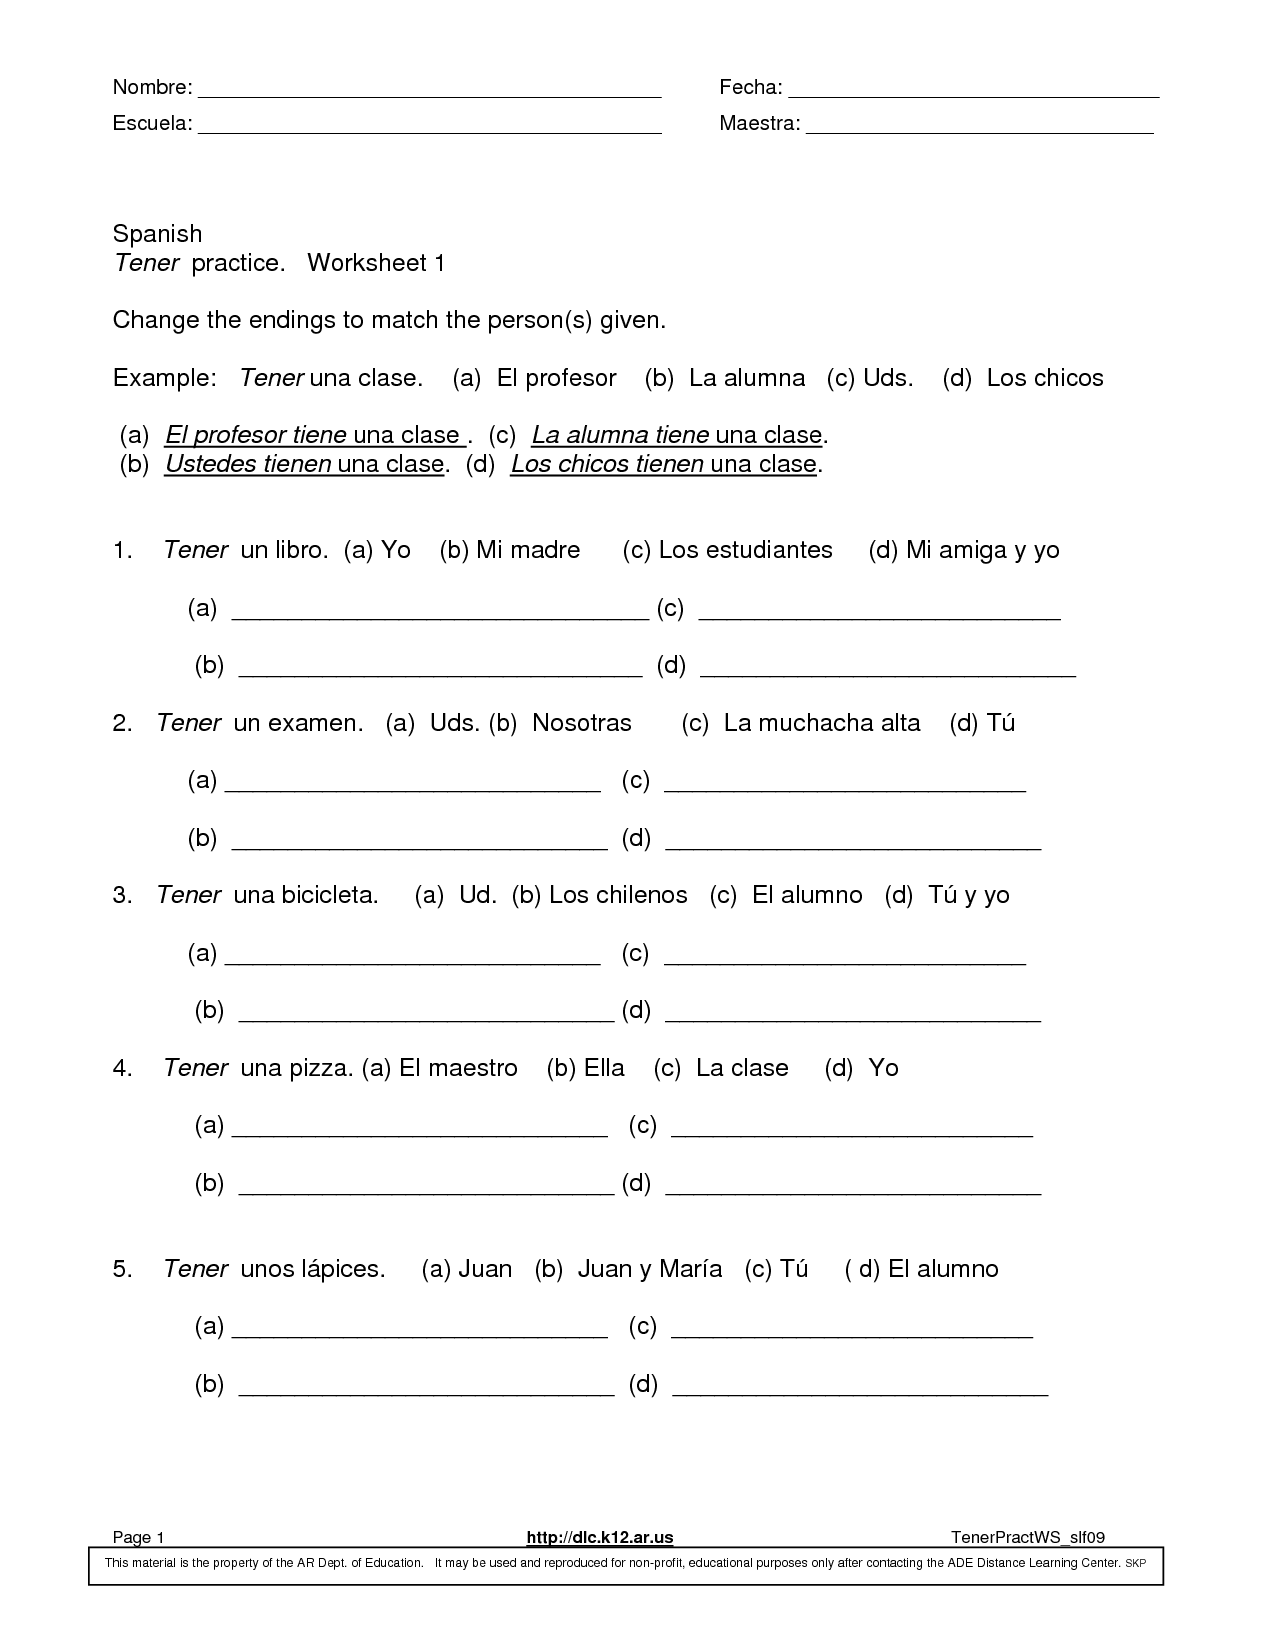 17 Best Images Of Spanish 1 Practice Worksheets Spanish Practice 